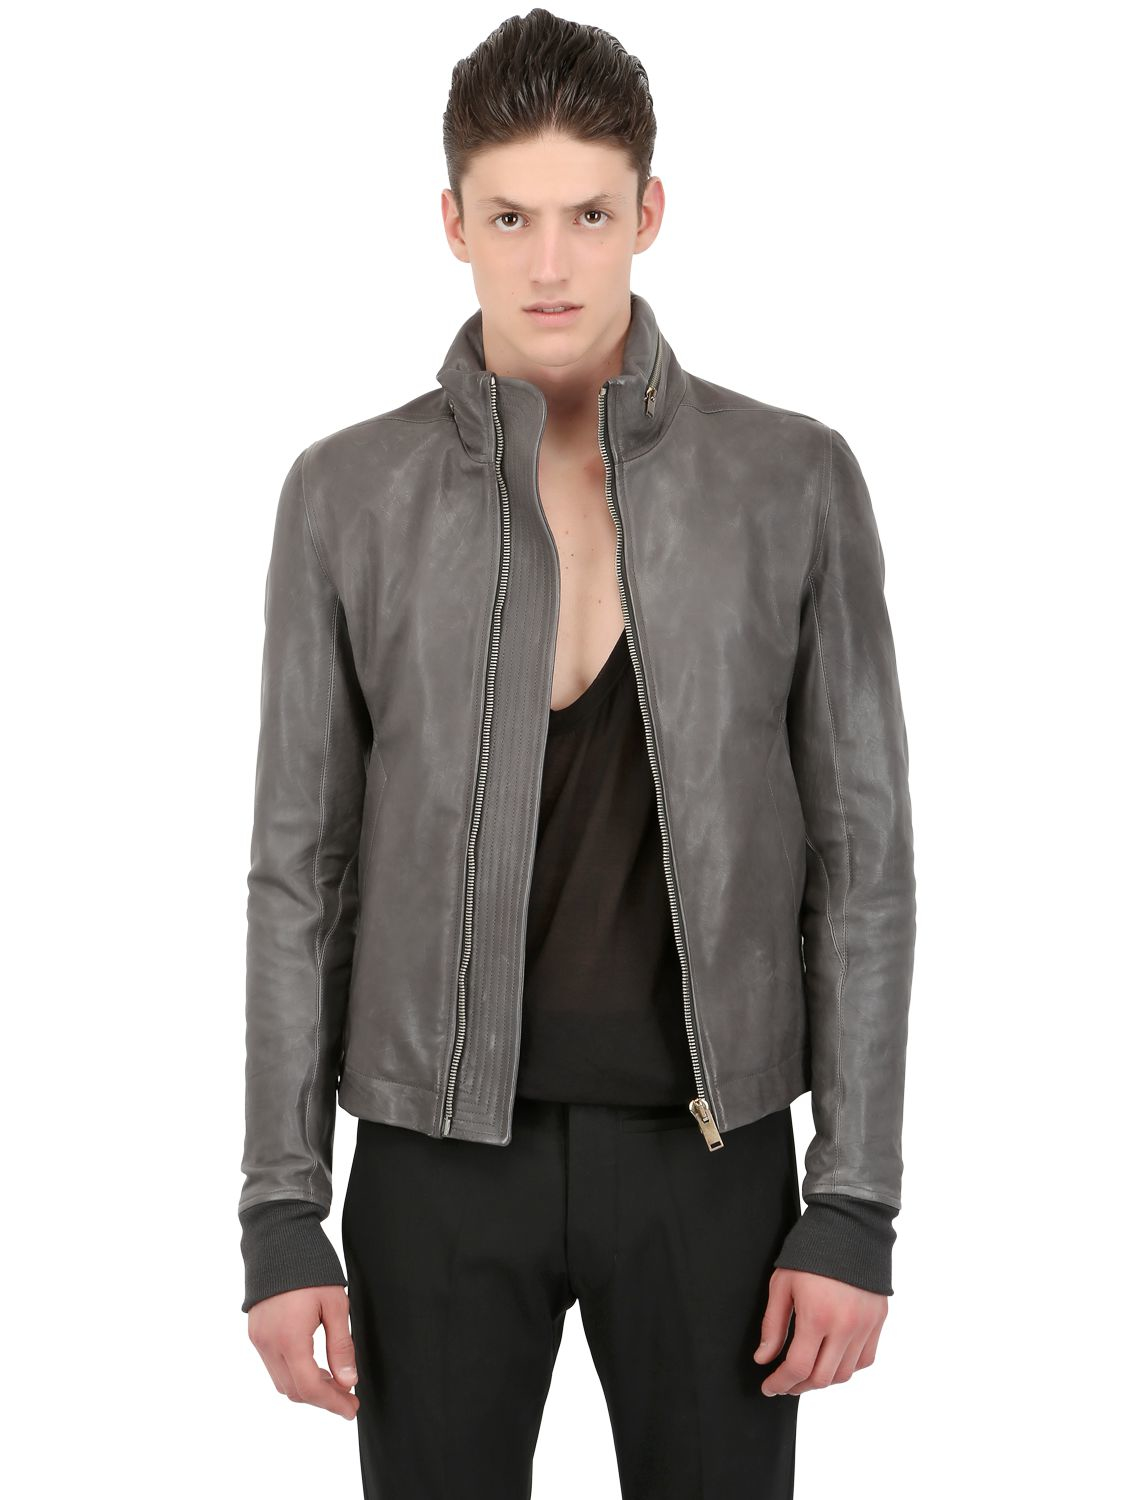 Lyst - Rick Owens Hooded Rugged Leather Jacket in Blue for Men